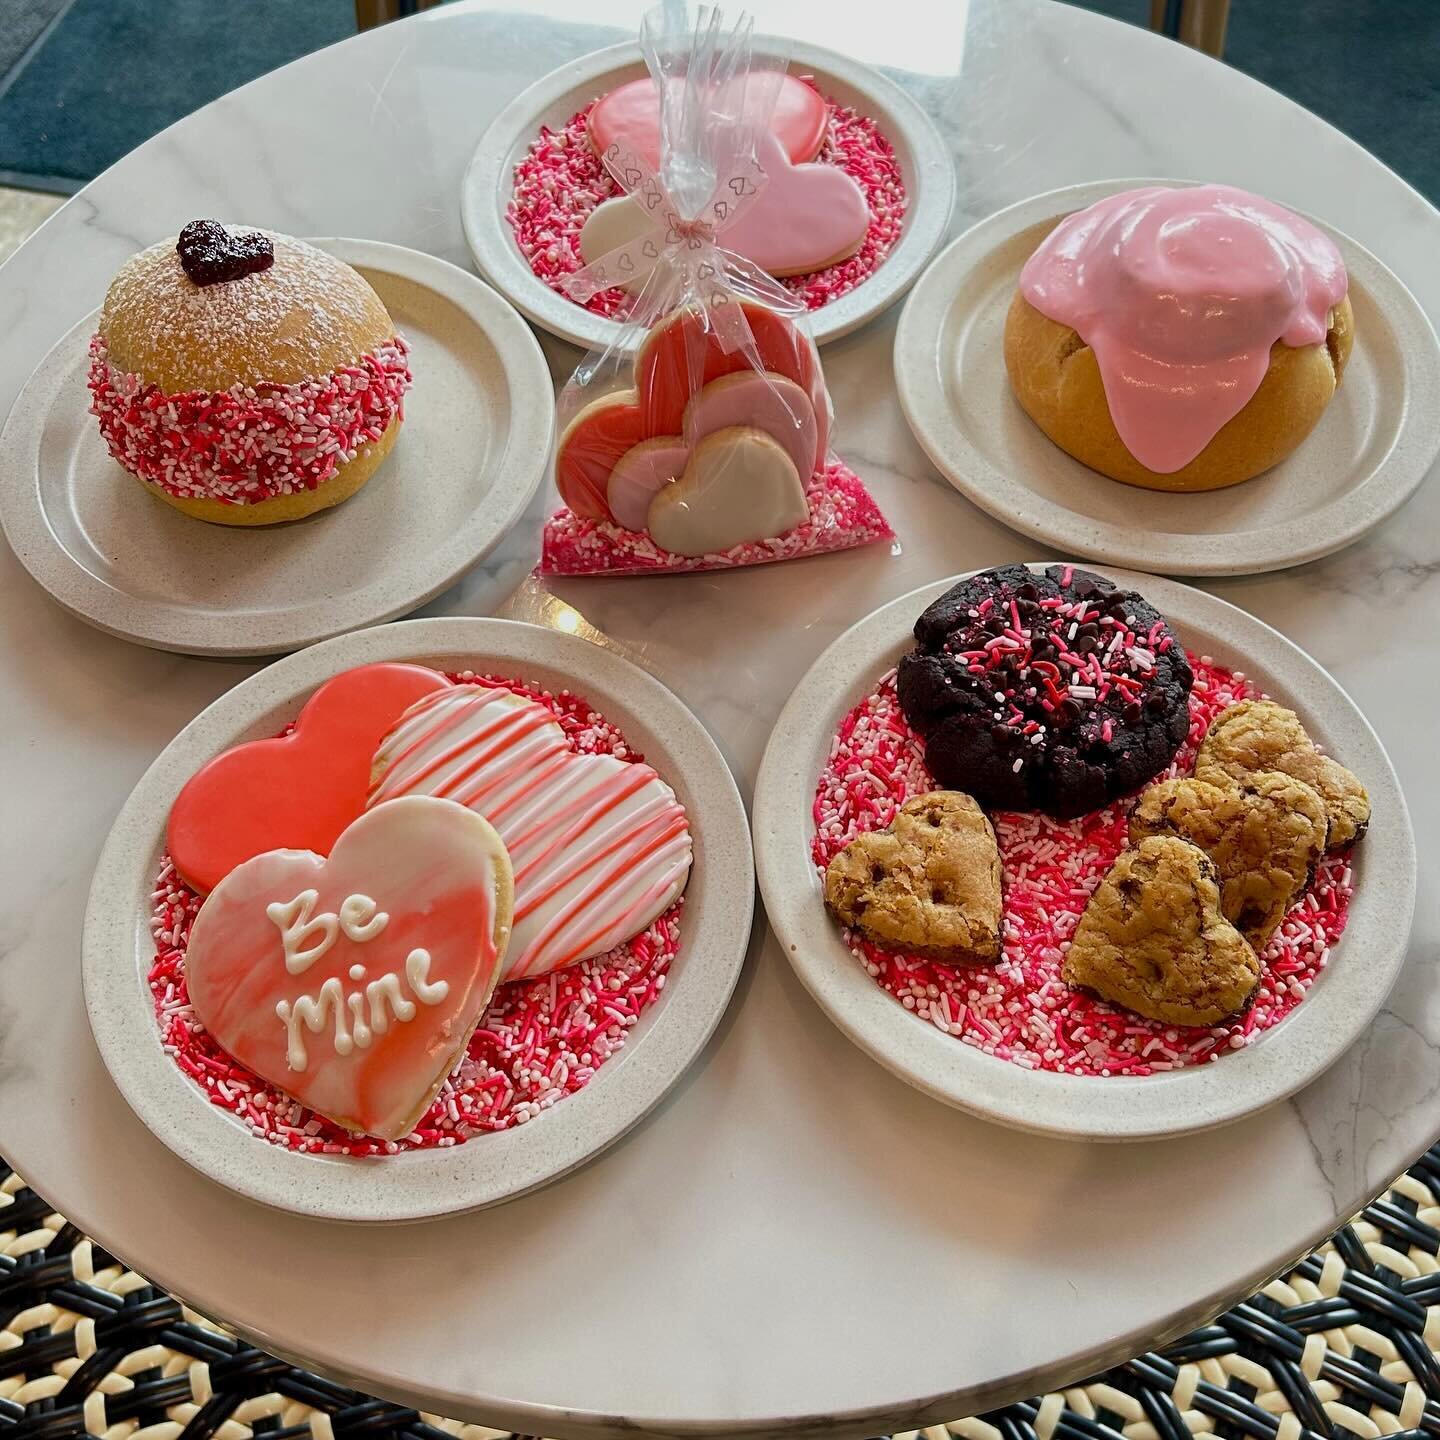 Happy Valentine's week from us at Florabella, sweet treats for your Sweetheart are available all week!

🤍

#missoula #bakedgoods #sweettooth #eatlocal #sugarcookiesofinstagram #cookies #valentinecookies #galentinesday #sweetheart